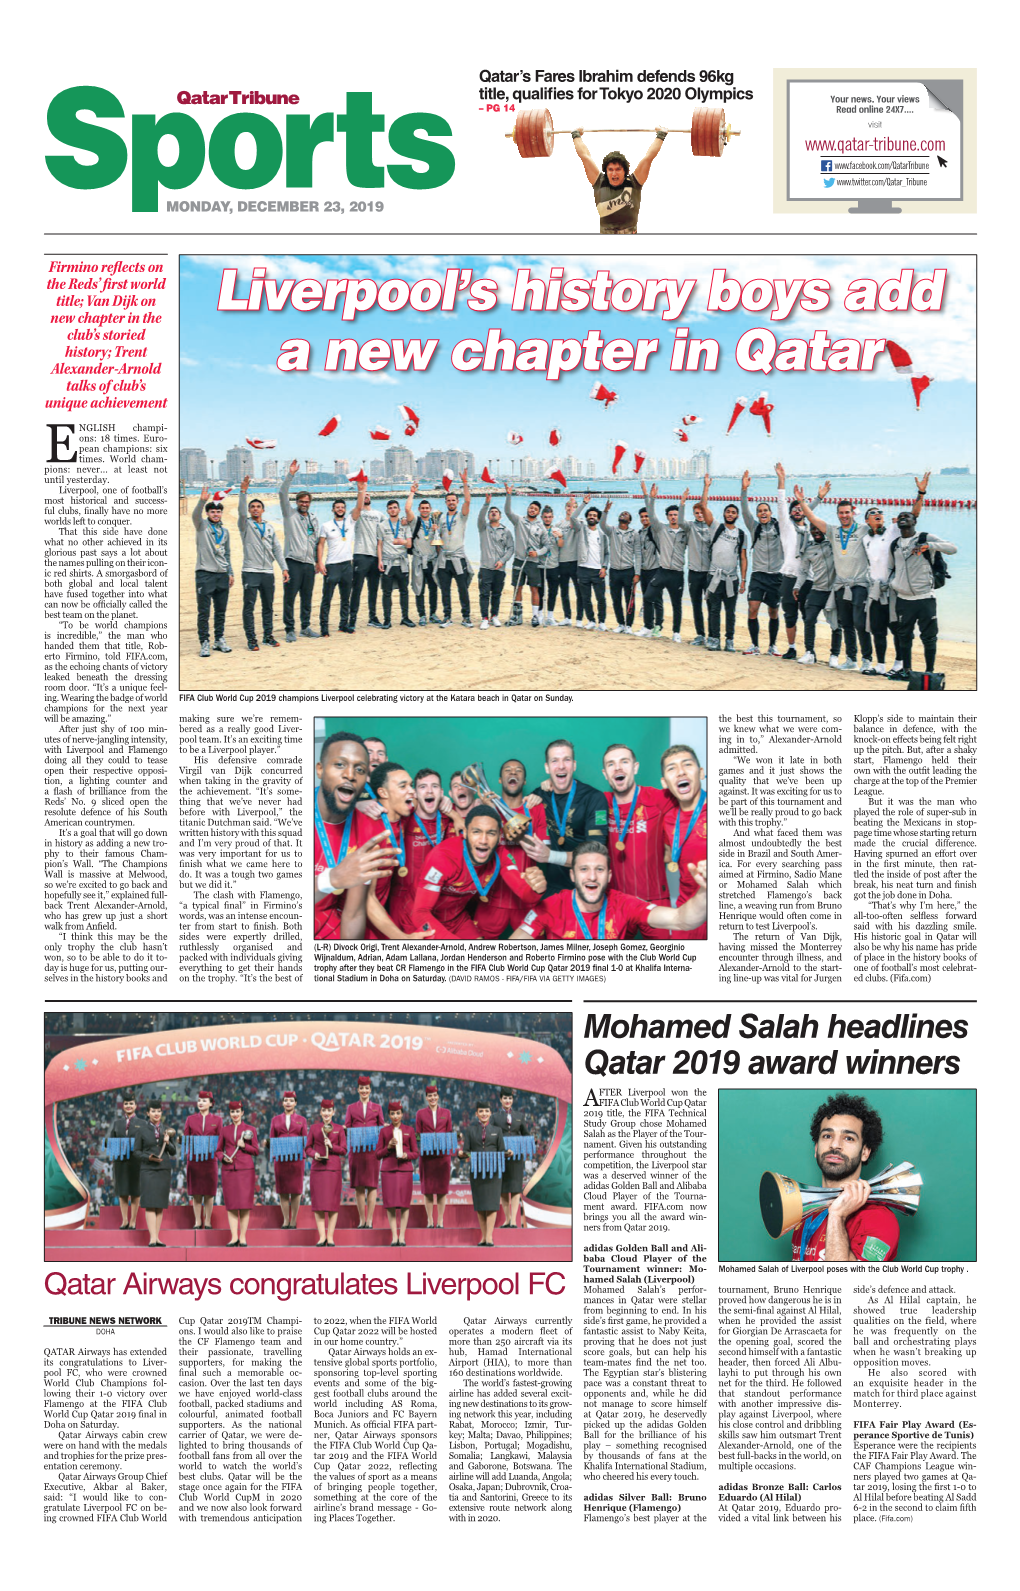 Liverpool's History Boys Add a New Chapter in Qatar